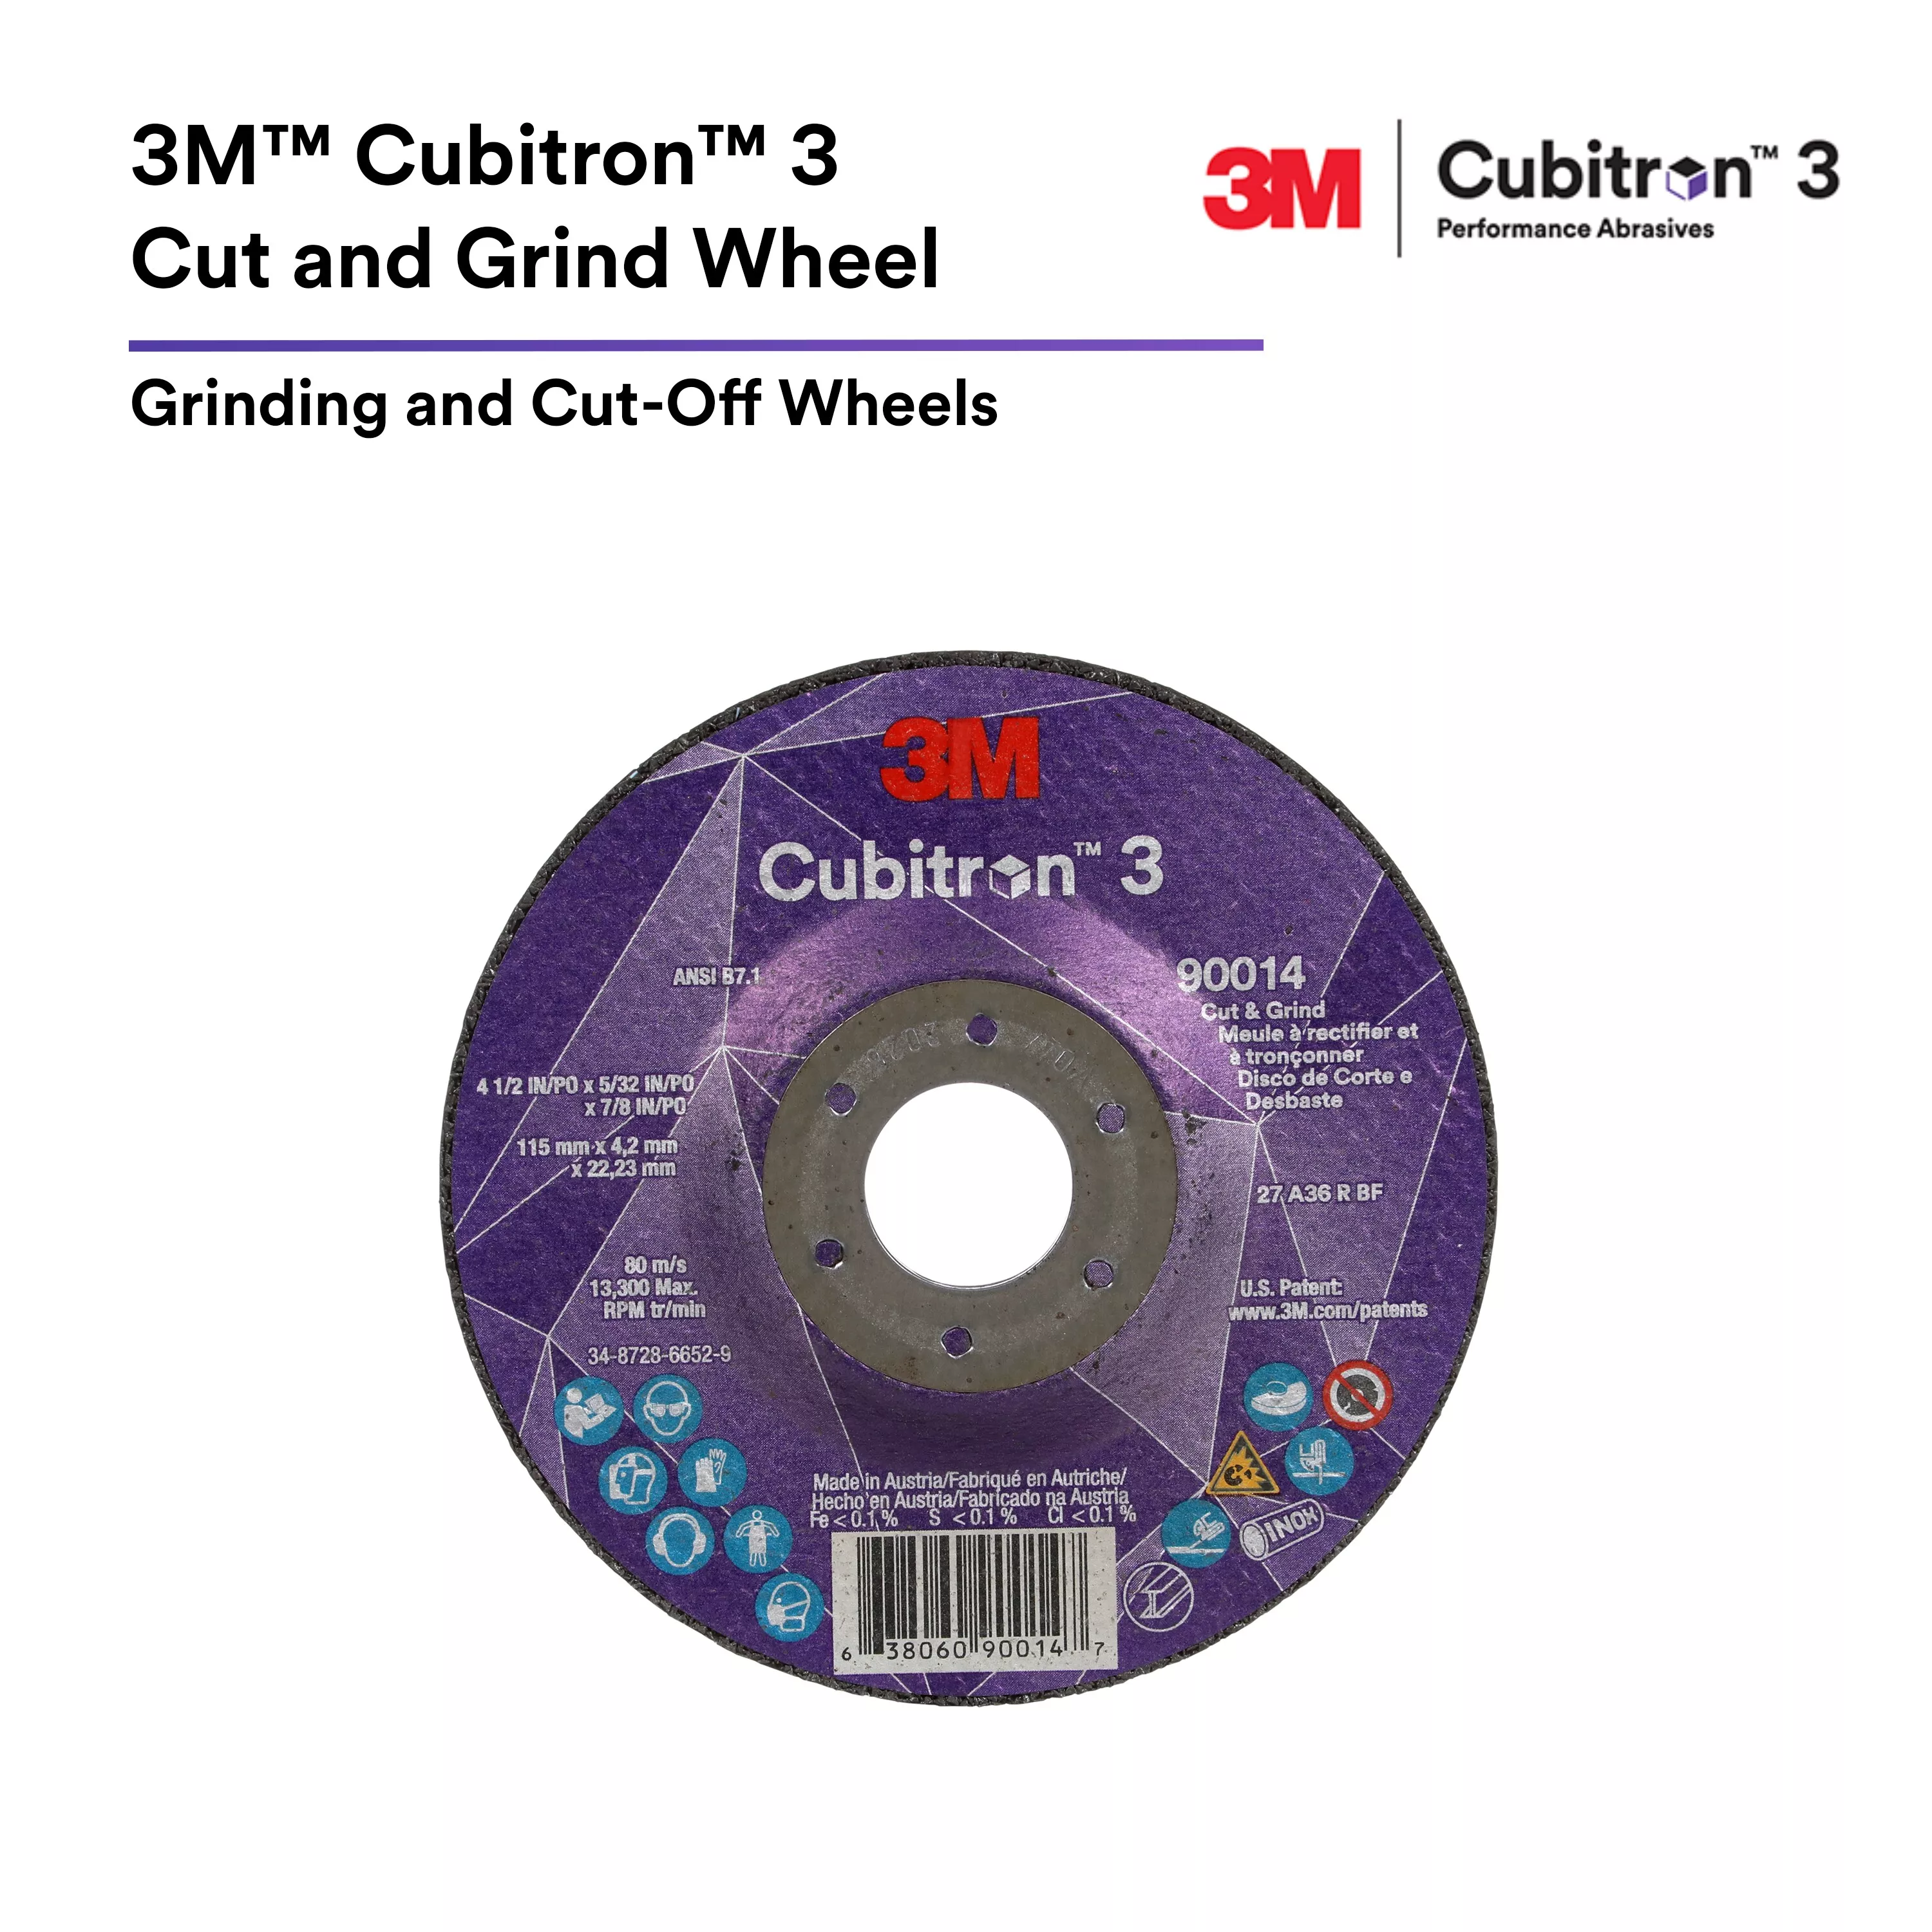 3M™ Cubitron™ 3 Cut and Grind Wheel, 66200, 36+, Type 27, 6 in x 5/32 in x 5/8 in-11 (150mmx4.2mm), ANSI, 10 ea/Case, Trial Pack